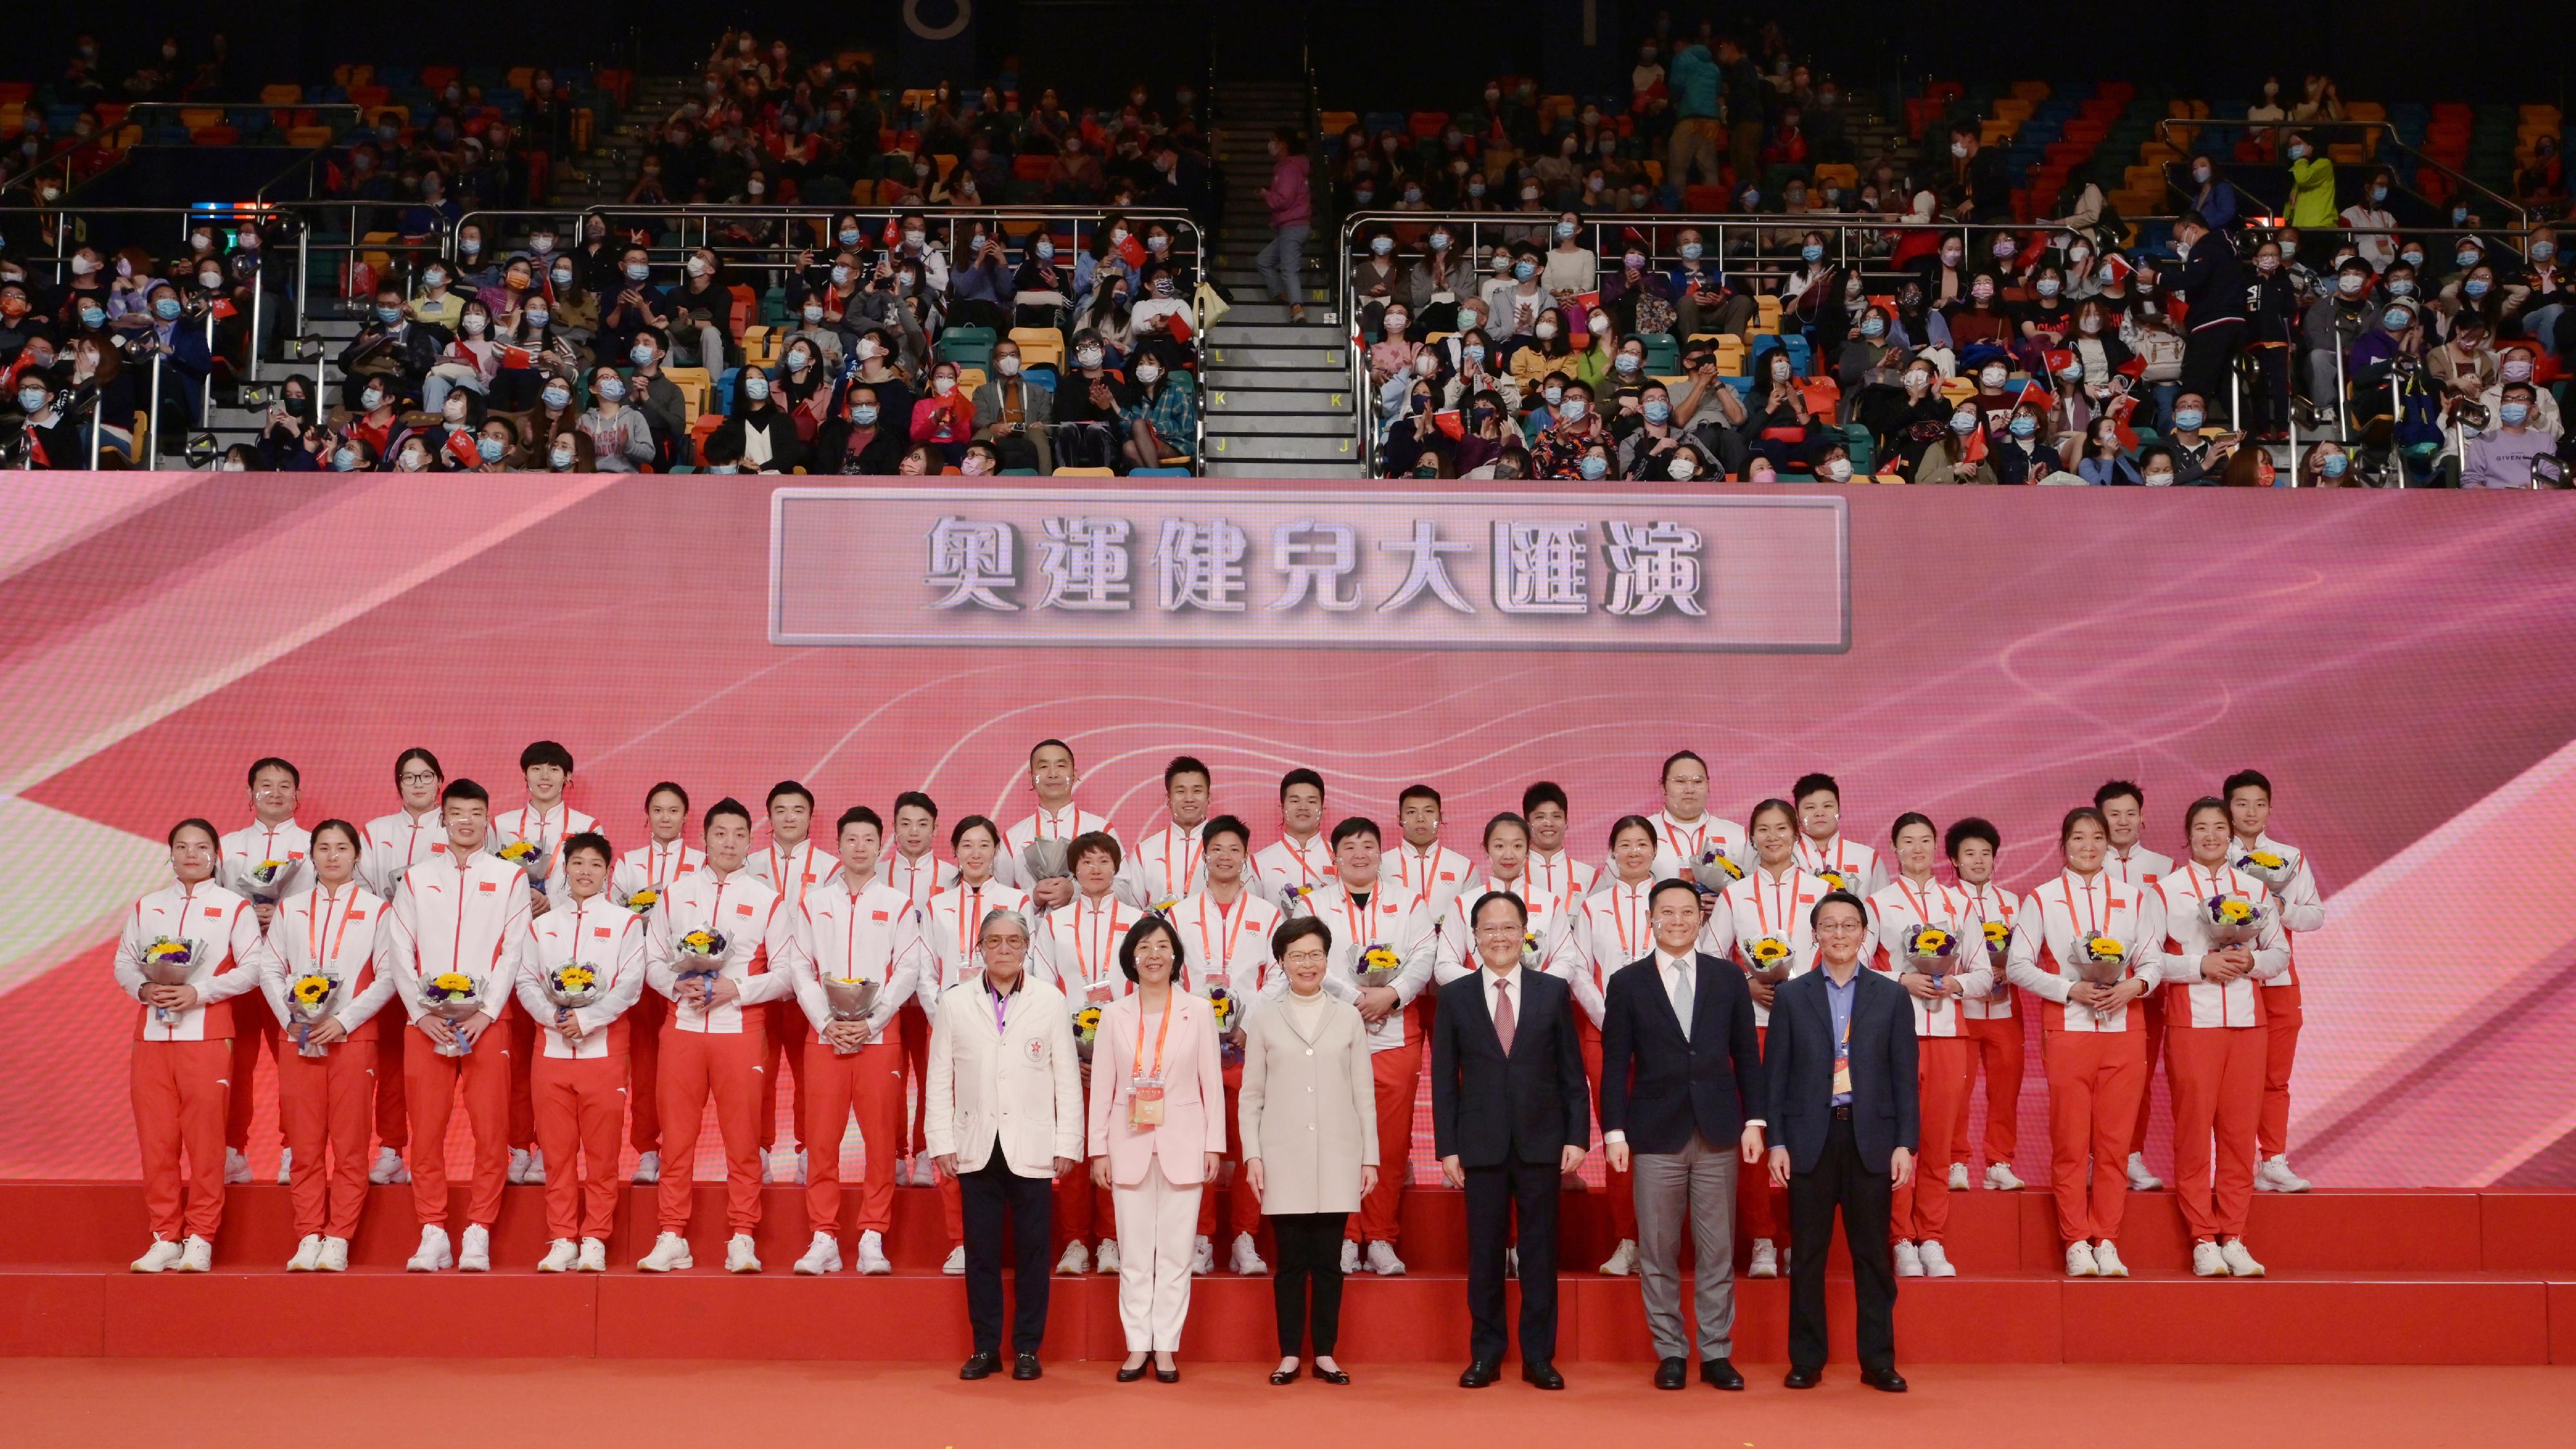 The Chief Executive, Mrs Carrie Lam, attended the Mainland Olympians Variety Show today (December 4). Photo shows (front row, from left) the President of the Sports Federation & Olympic Committee of Hong Kong, China, Mr Timothy Fok; Deputy Director of the General Administration of Sport of China cum the Chef de Mission of the Tokyo 2020 Olympic Games Mainland Olympians delegation Ms Yang Ning; Mrs Lam; Deputy Director of the Liaison Office of the Central People's Government in the Hong Kong Special Administrative Region Mr Chen Dong; the Secretary for Home Affairs, Mr Caspar Tsui; and the Director of Leisure and Cultural Services, Mr Vincent Liu, with the delegation members.